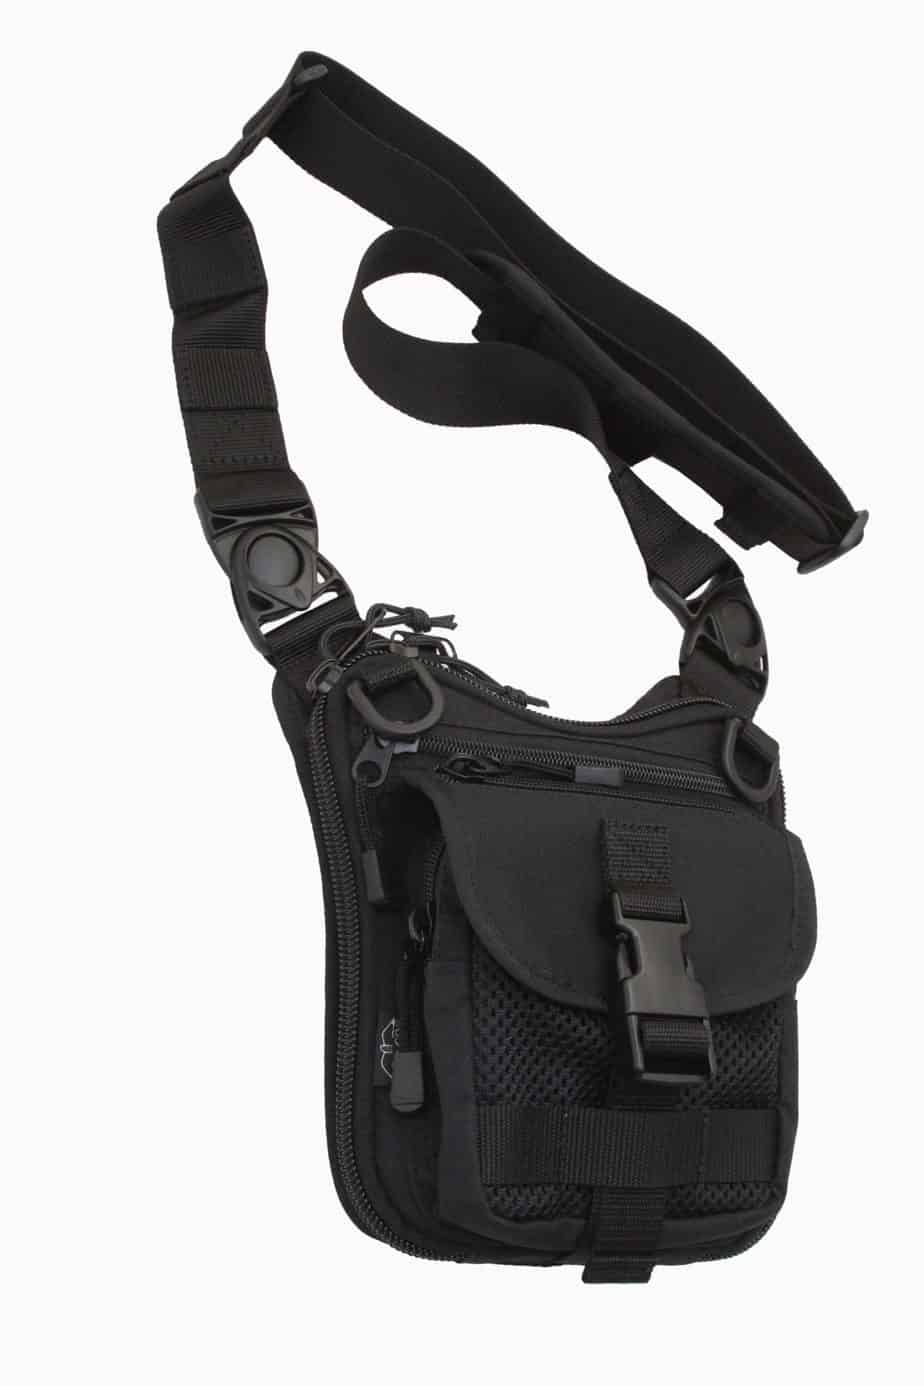 Tactical Waist Bag Concealed Gun Carry Pouch Military Pistol